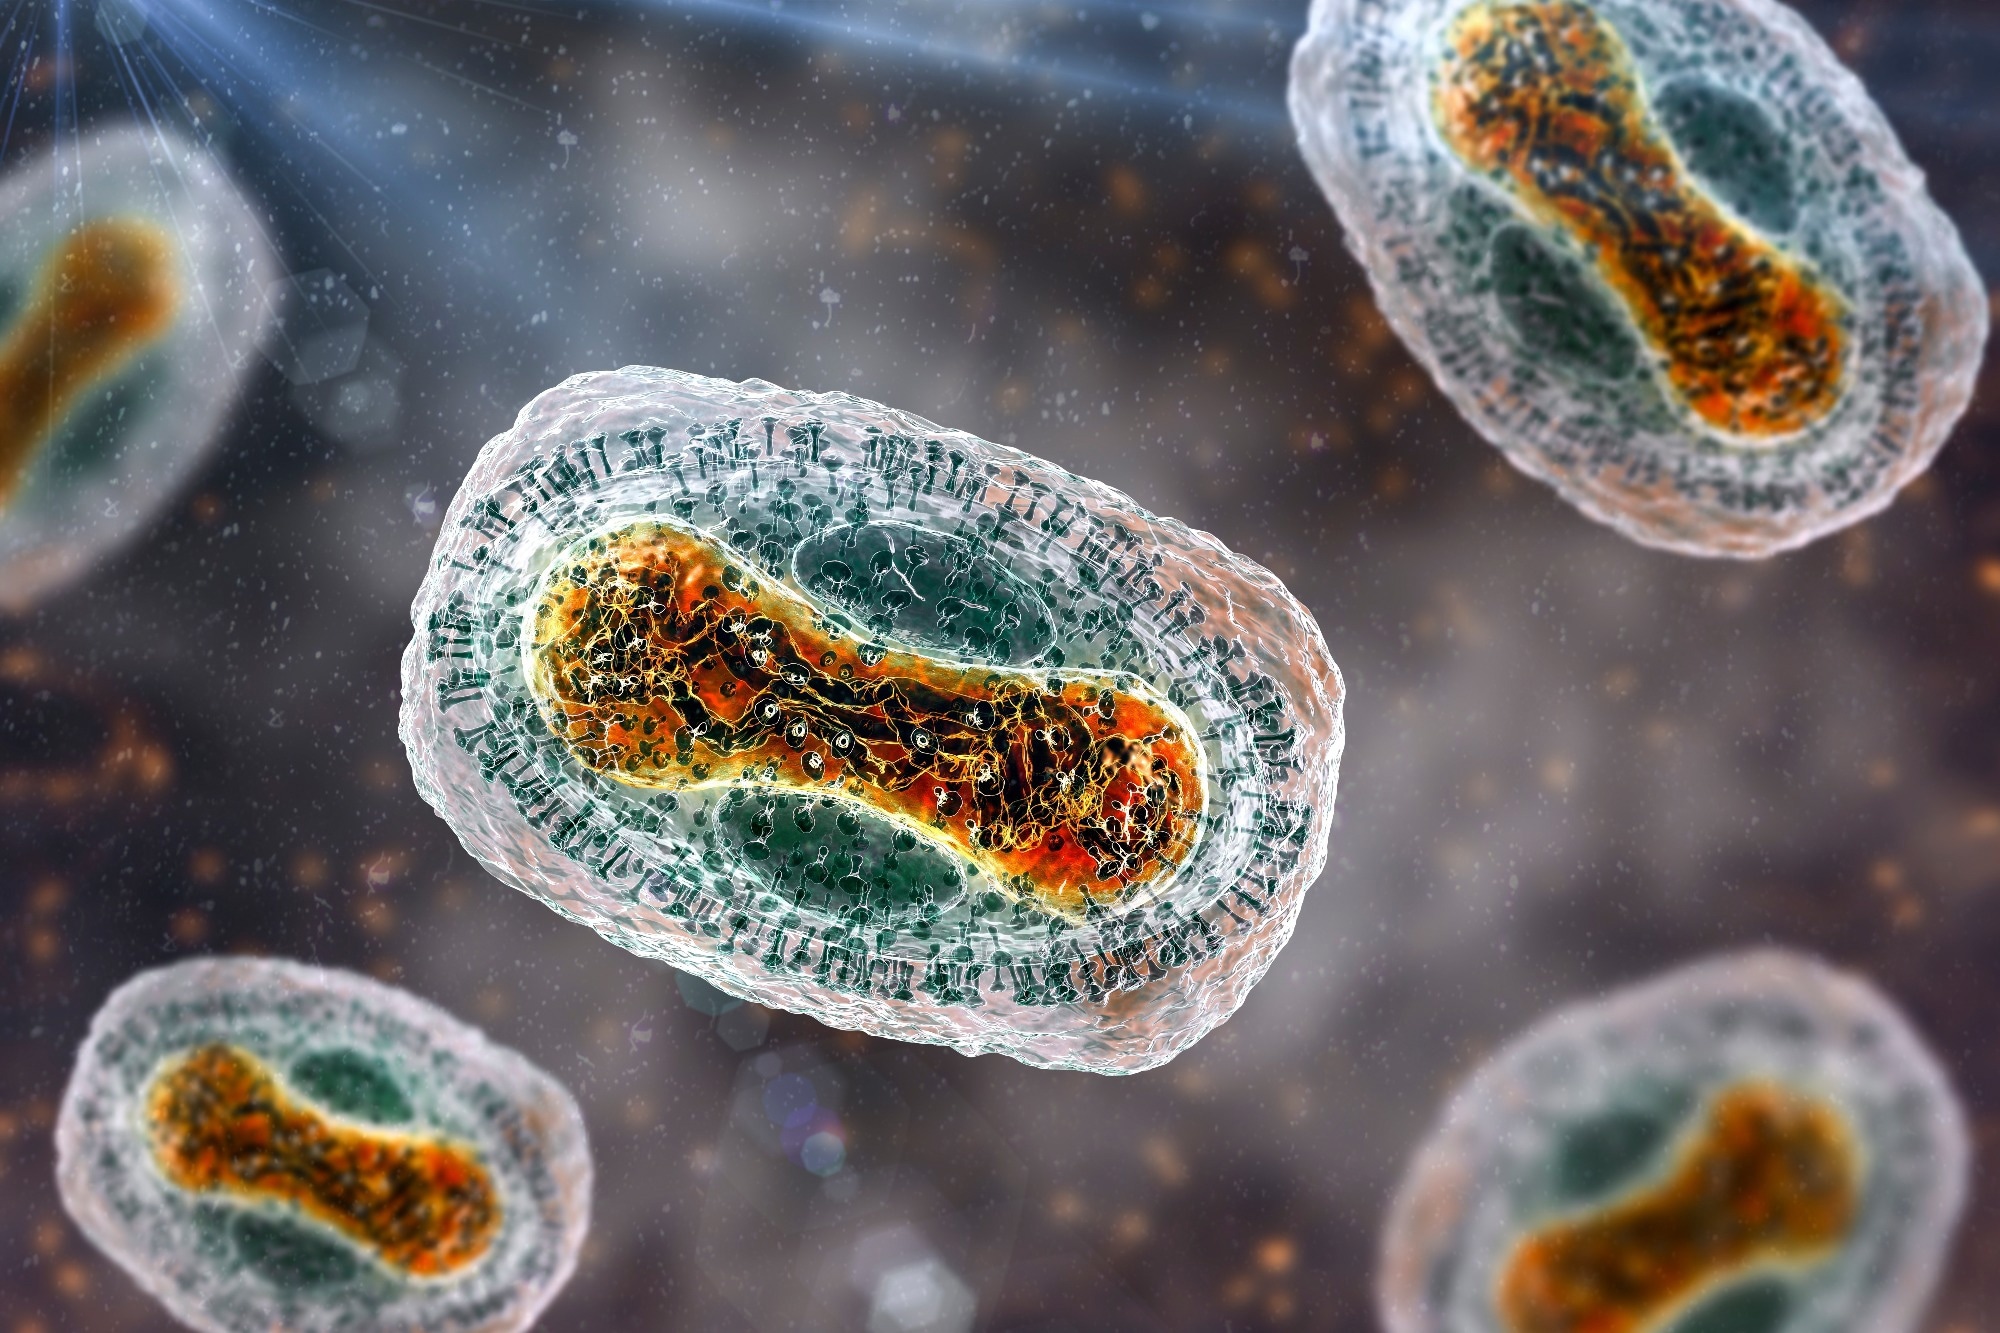 Study: Clinical characteristics of monkeypox virus infections in HIV-infected and HIV-uninfected men: A large outbreak cohort in Germany.  Image credit: Kateryna Kon / Shutterstock